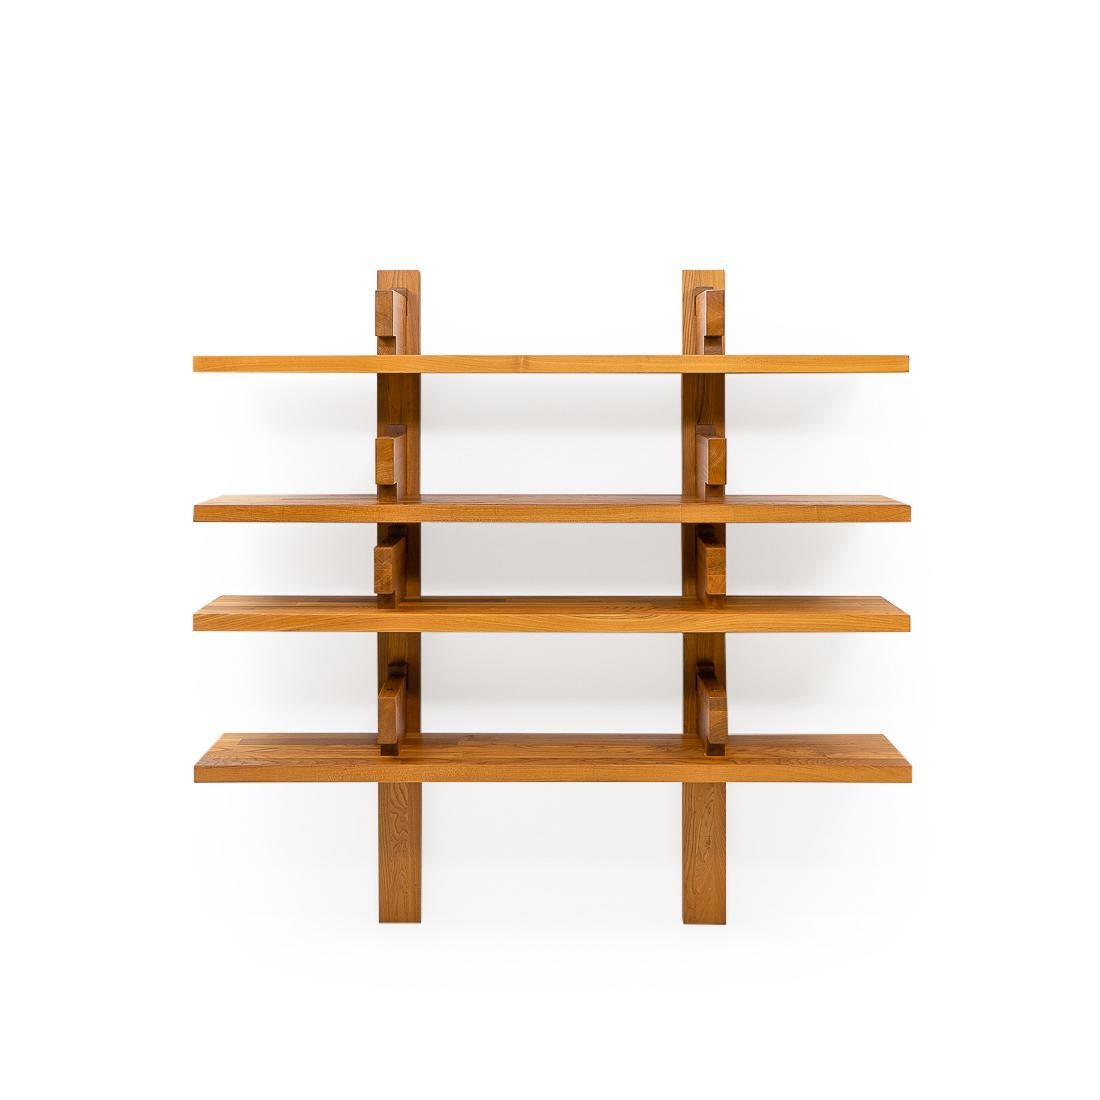 A beautiful, original edition B17 bookshelf designed by Pierre Chapo in French solid elm.

The vintage B17 shelf is a highly sought after piece from the Chapo workshop; it combines ingenious design with a sculptural appearance. 

French elm is